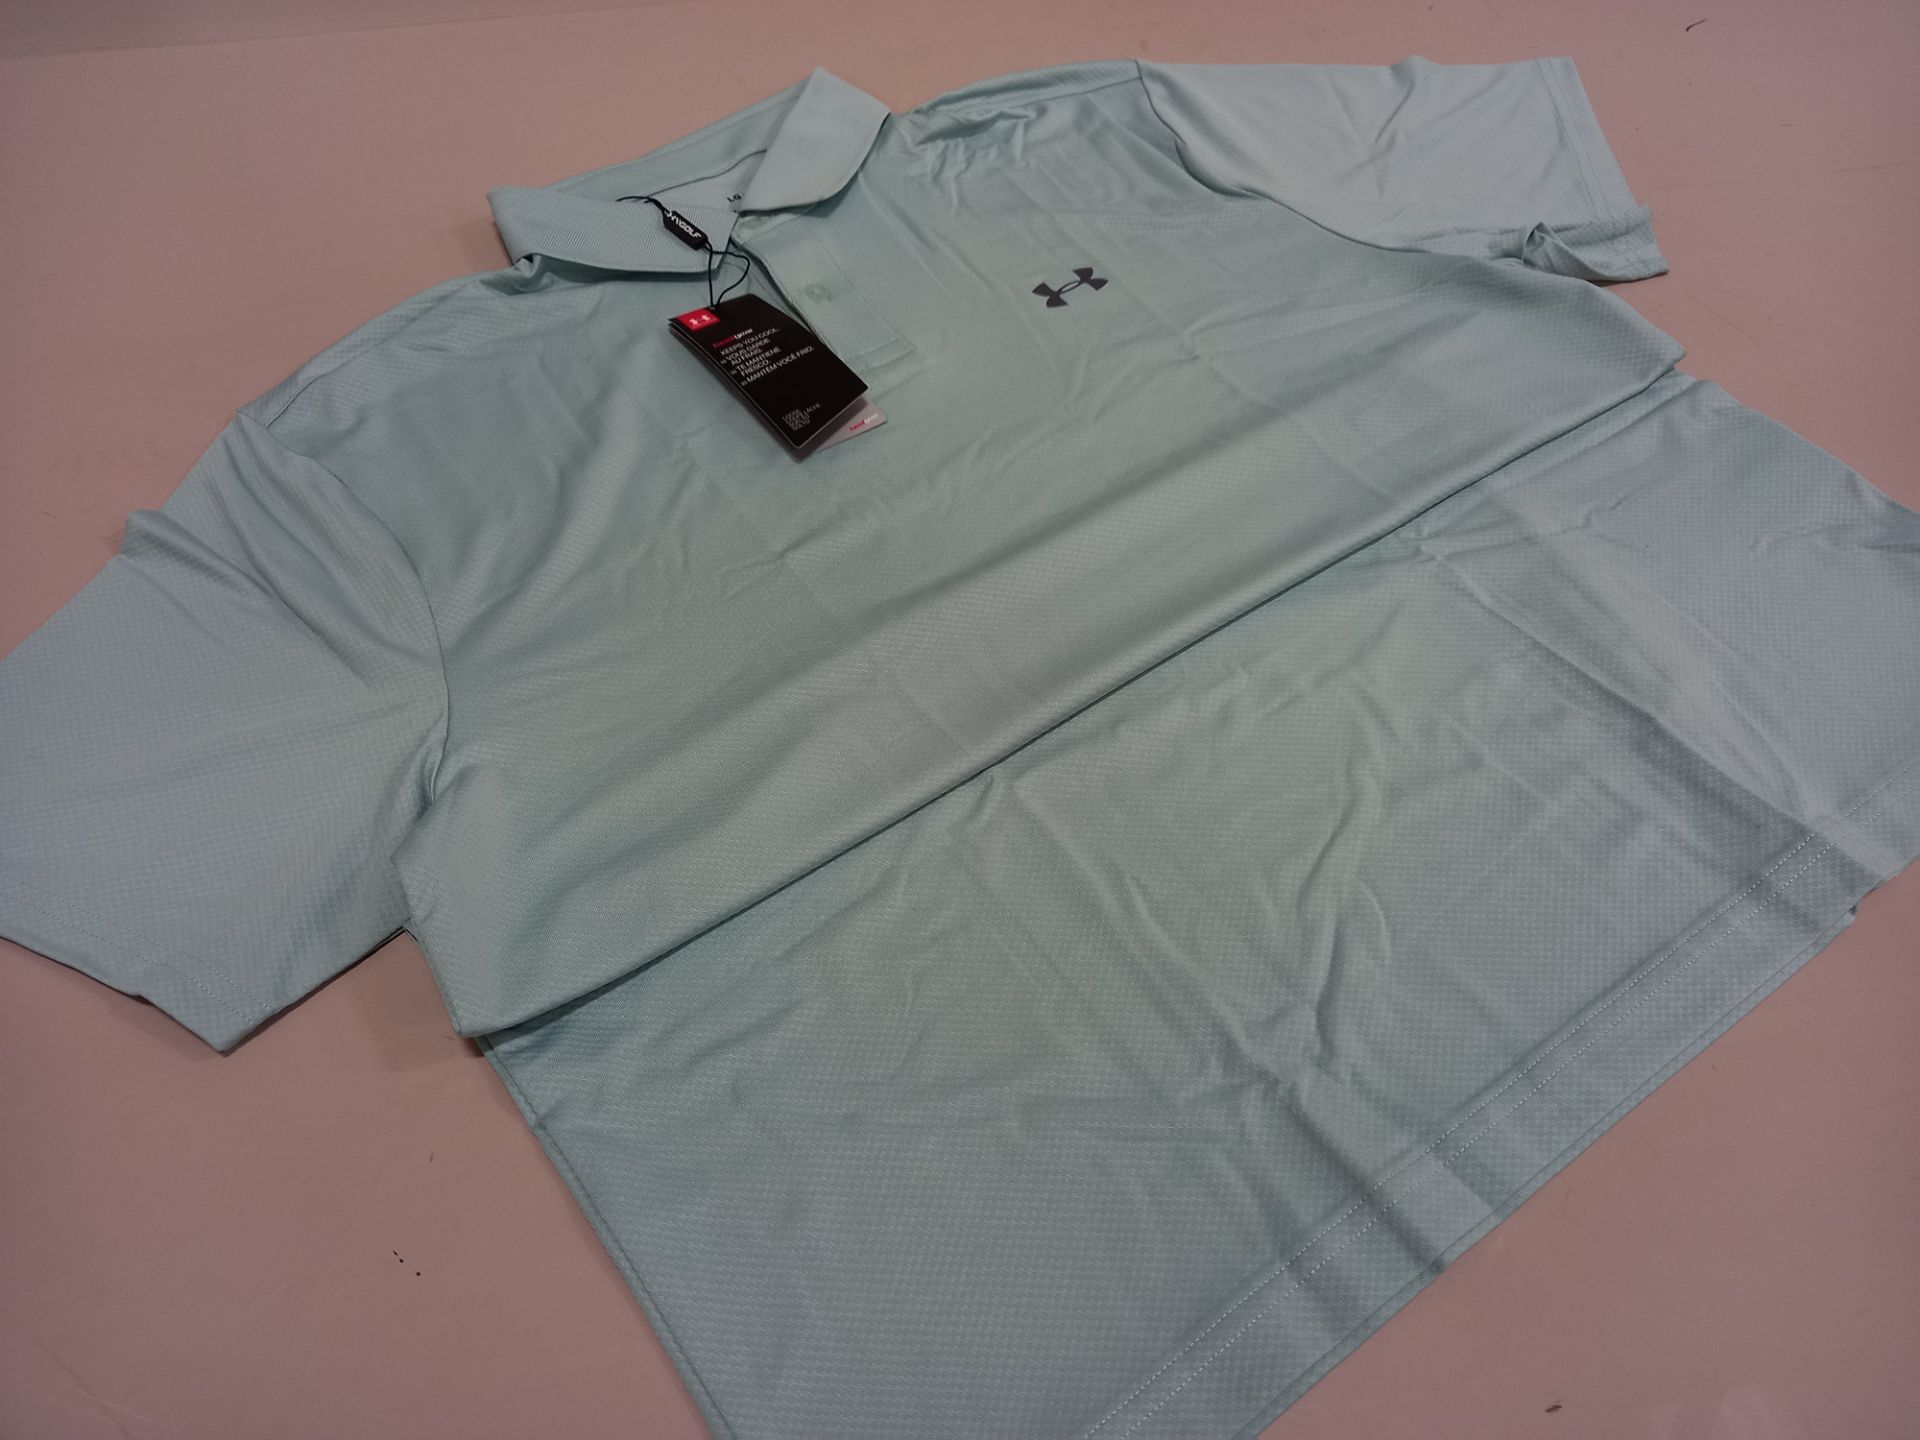 15 X BRAND NEW UNDER ARMOUR BAGGED PERFORM POLO SHIRT (VARIOUS SIZES M - 2XL) TOTAL RRP £524.85 (